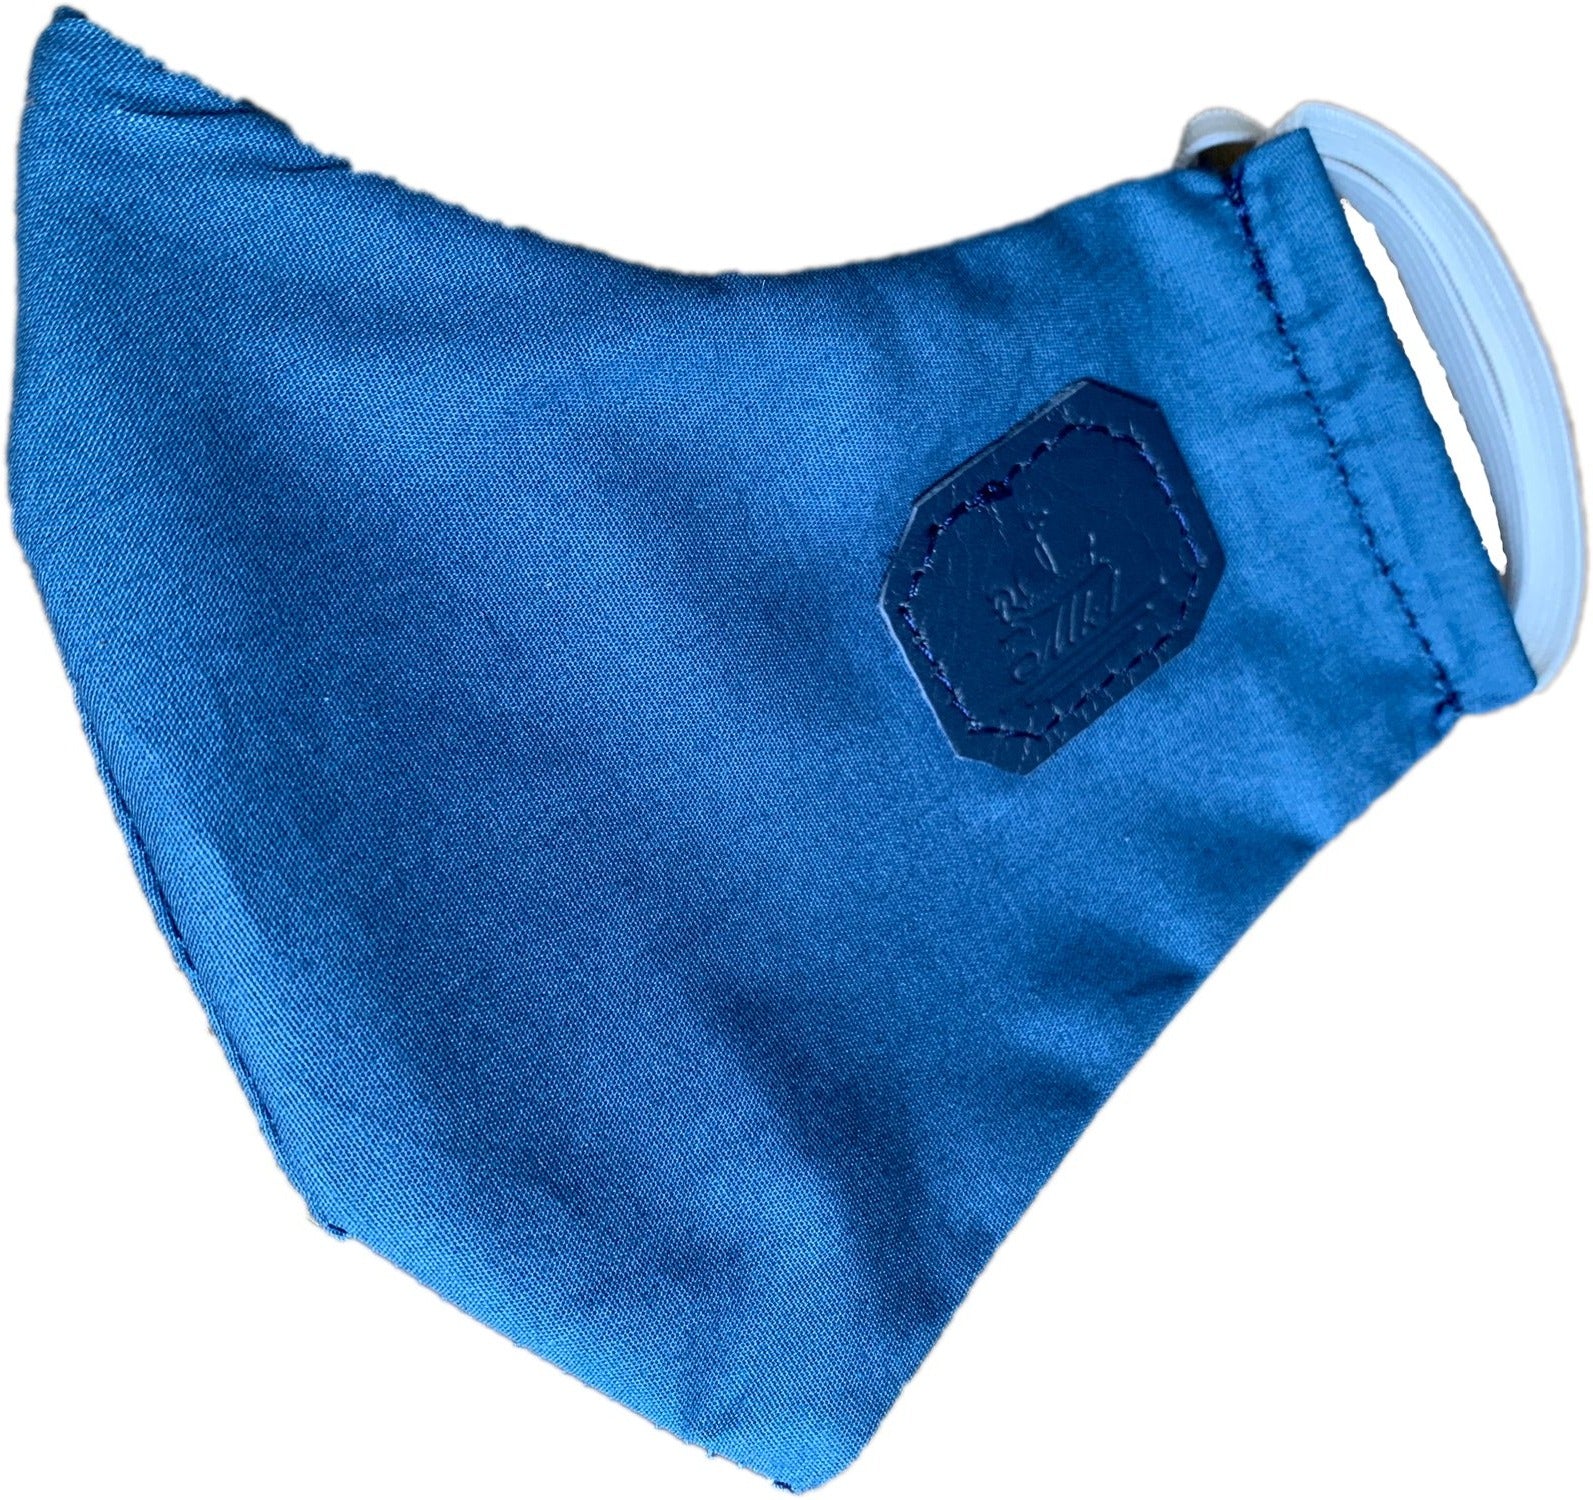 Mask from multi-purpose washable cotton with filter pocket and nose support Mk1/2-1 lgth blue LG blue